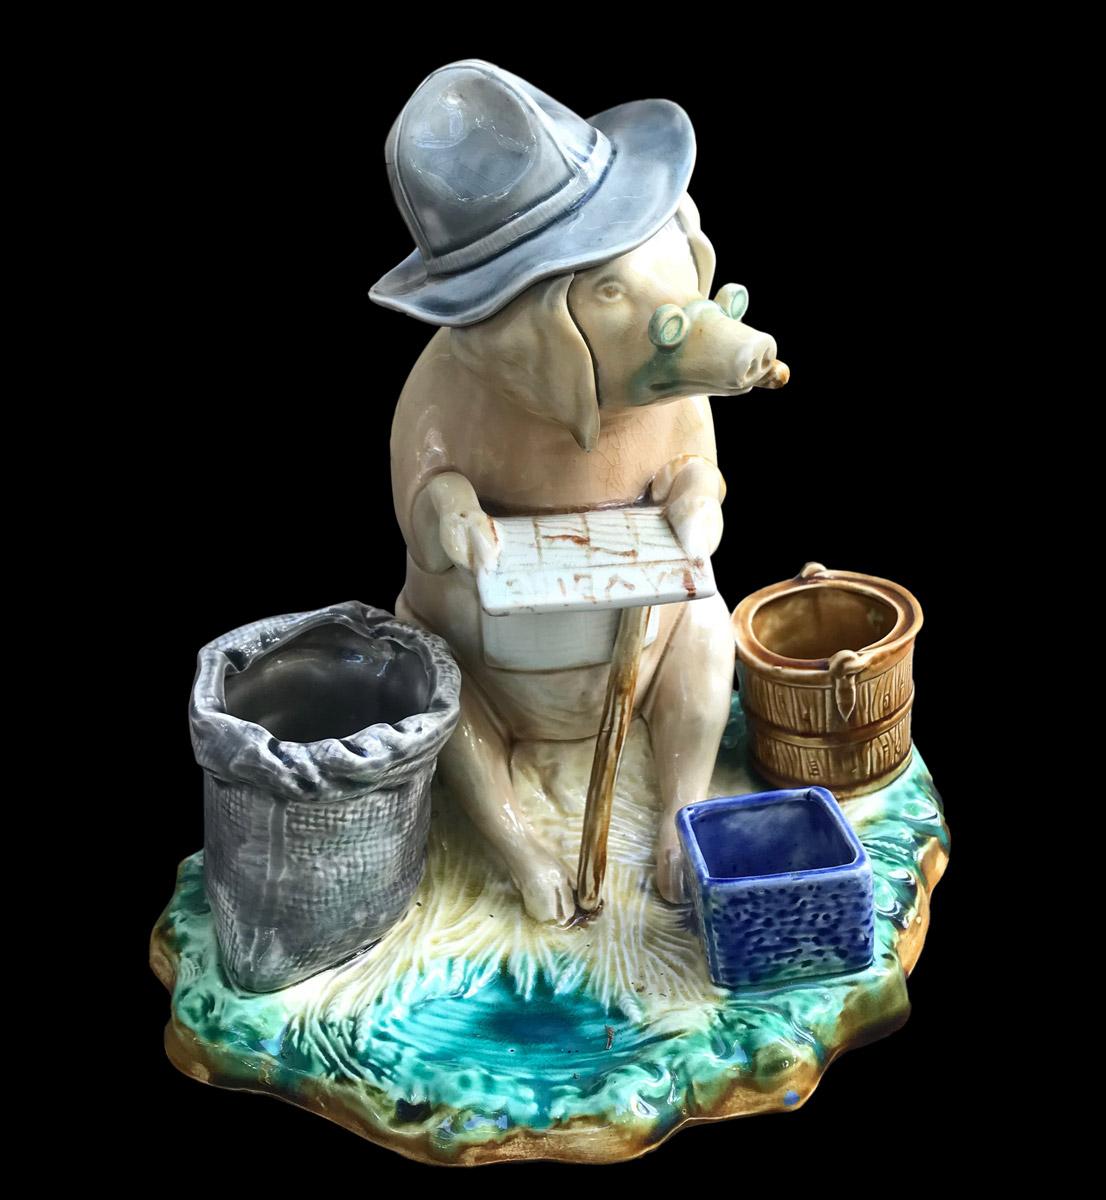 Onnaing style barbotine tobacco box representing a sitting pig with a cane, wearing glasses and a blue hat, smoking and reading a French newspaper called 